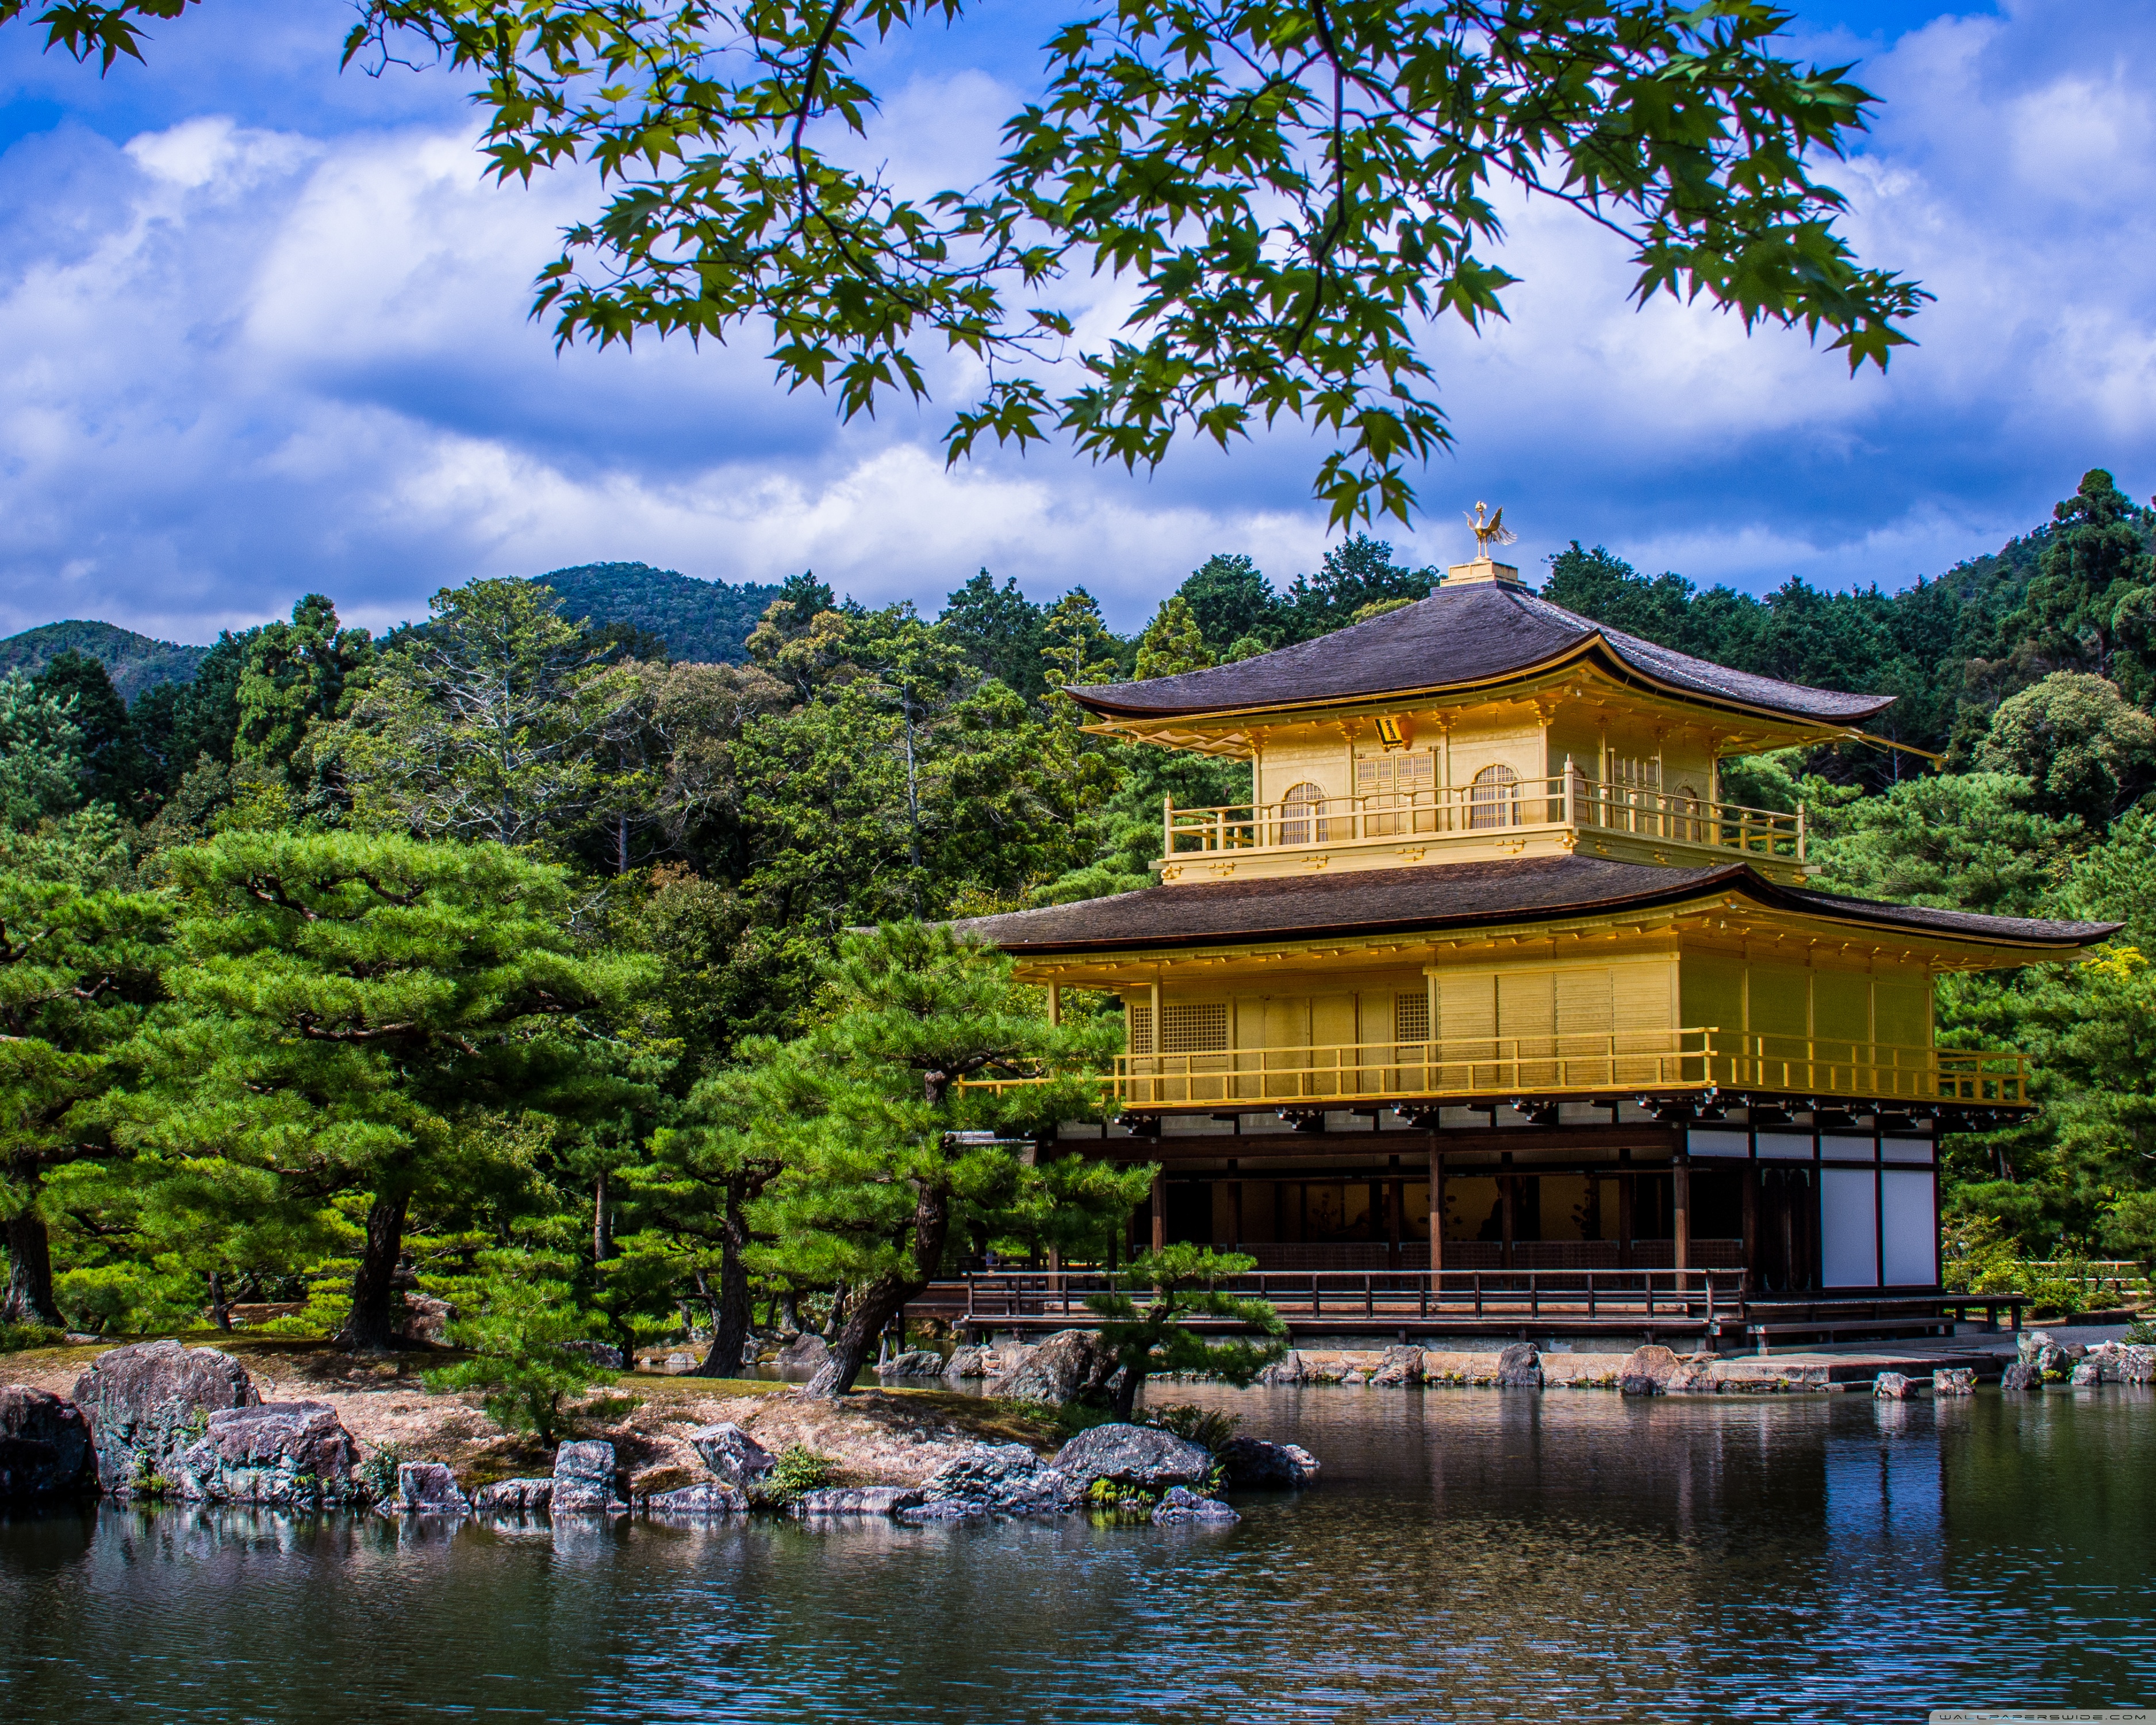 golden temple hd wallpaper 1366x768,nature,natural landscape,chinese architecture,architecture,japanese architecture